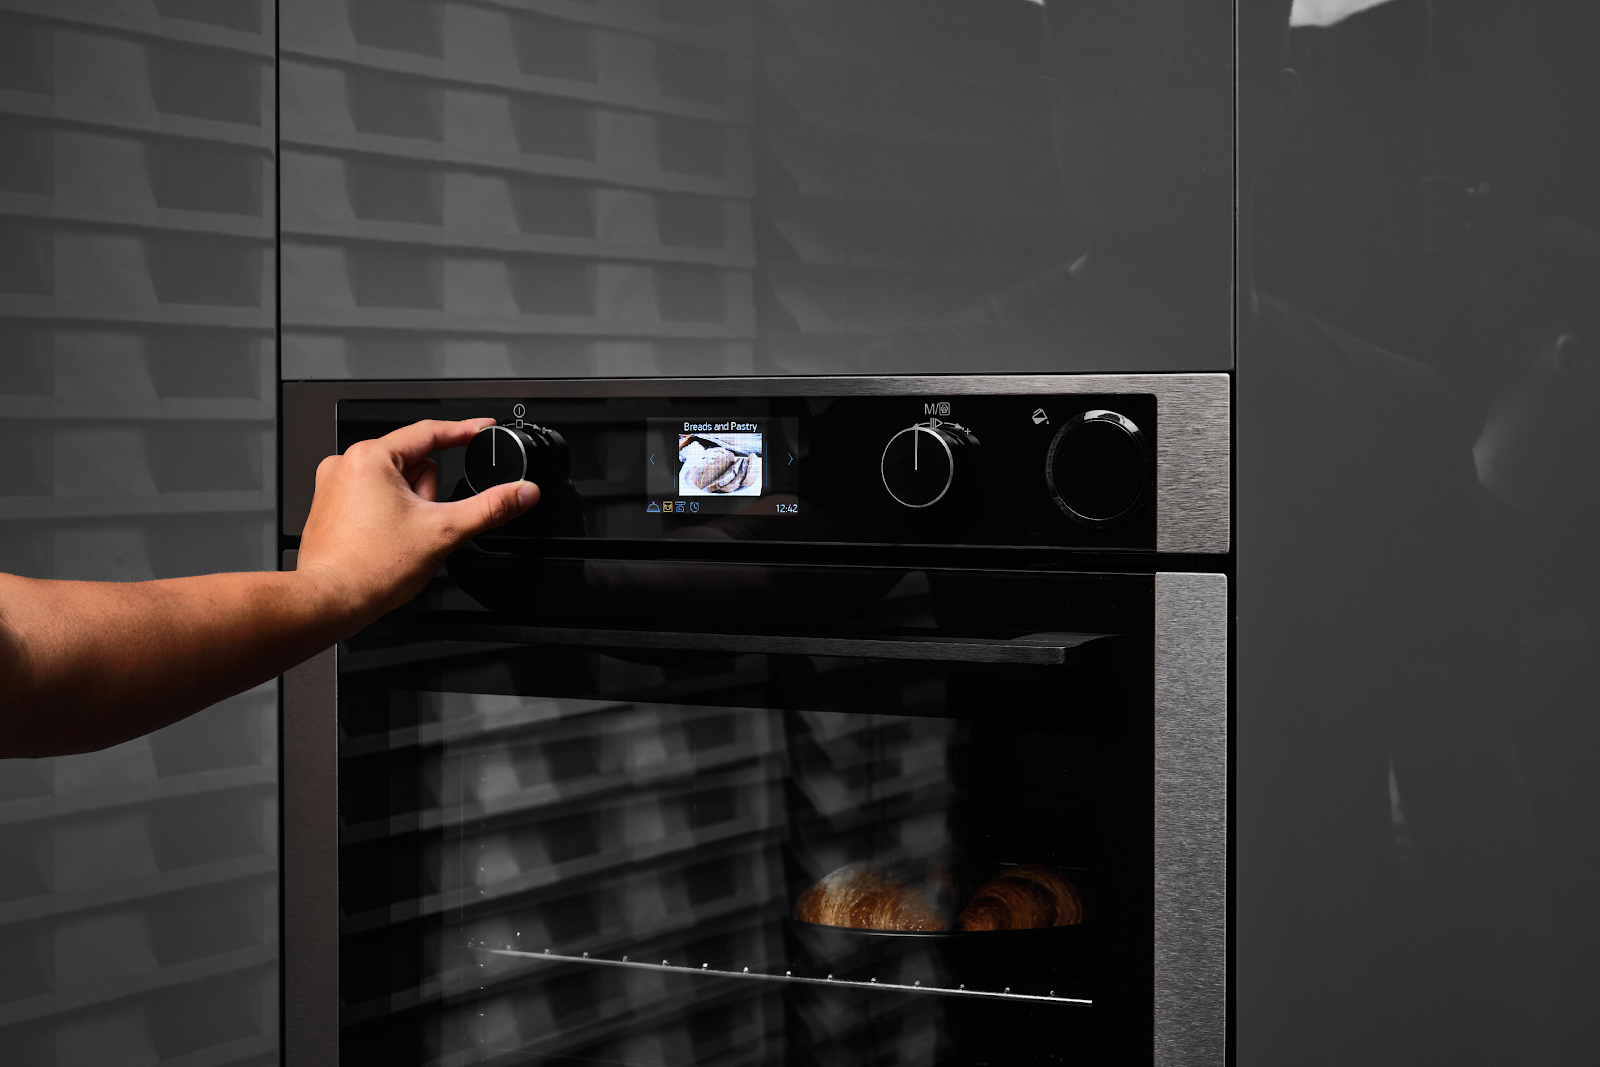 A hand turning a knob on an oven

Description automatically generated